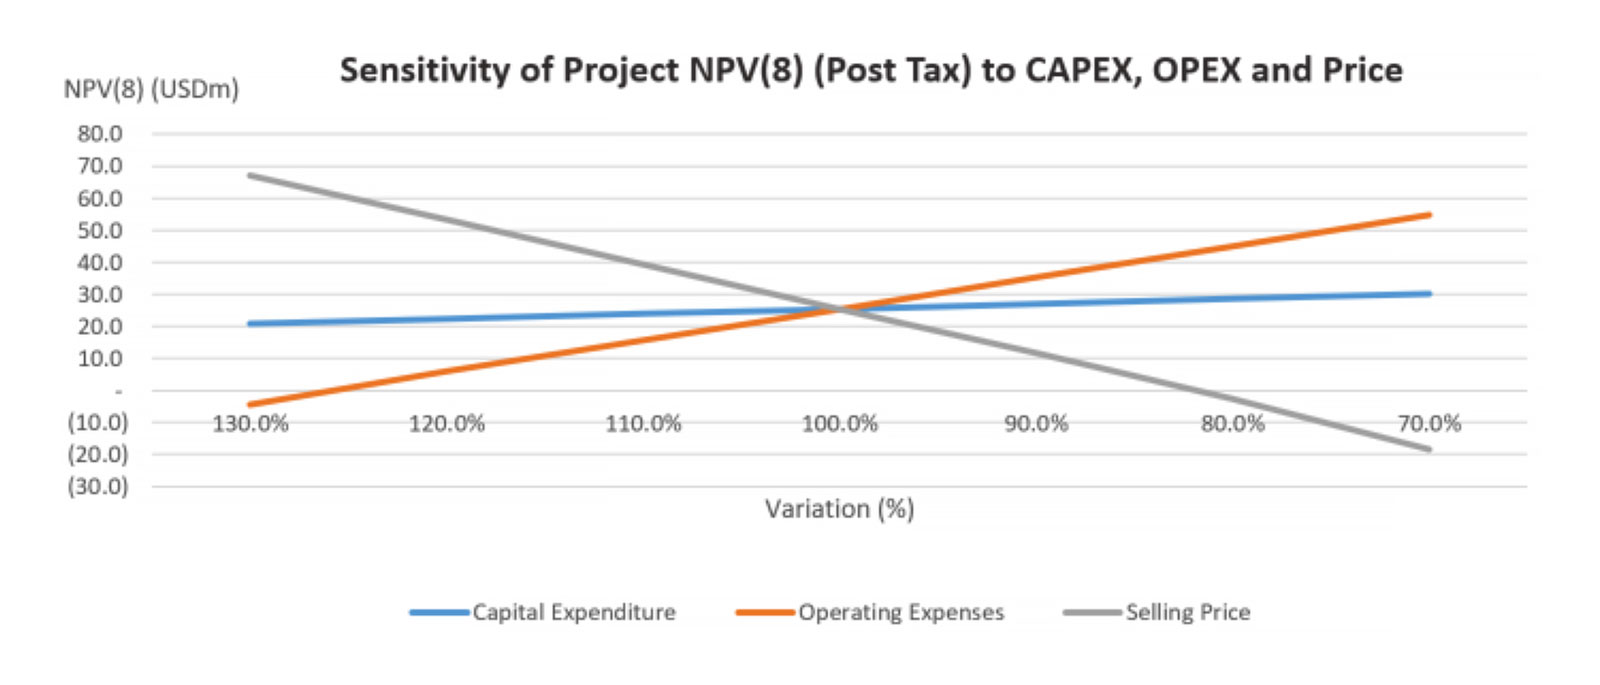 Sensitivity of Project NPV (8) (Post-tax) to CAPEX, OPEX and Price